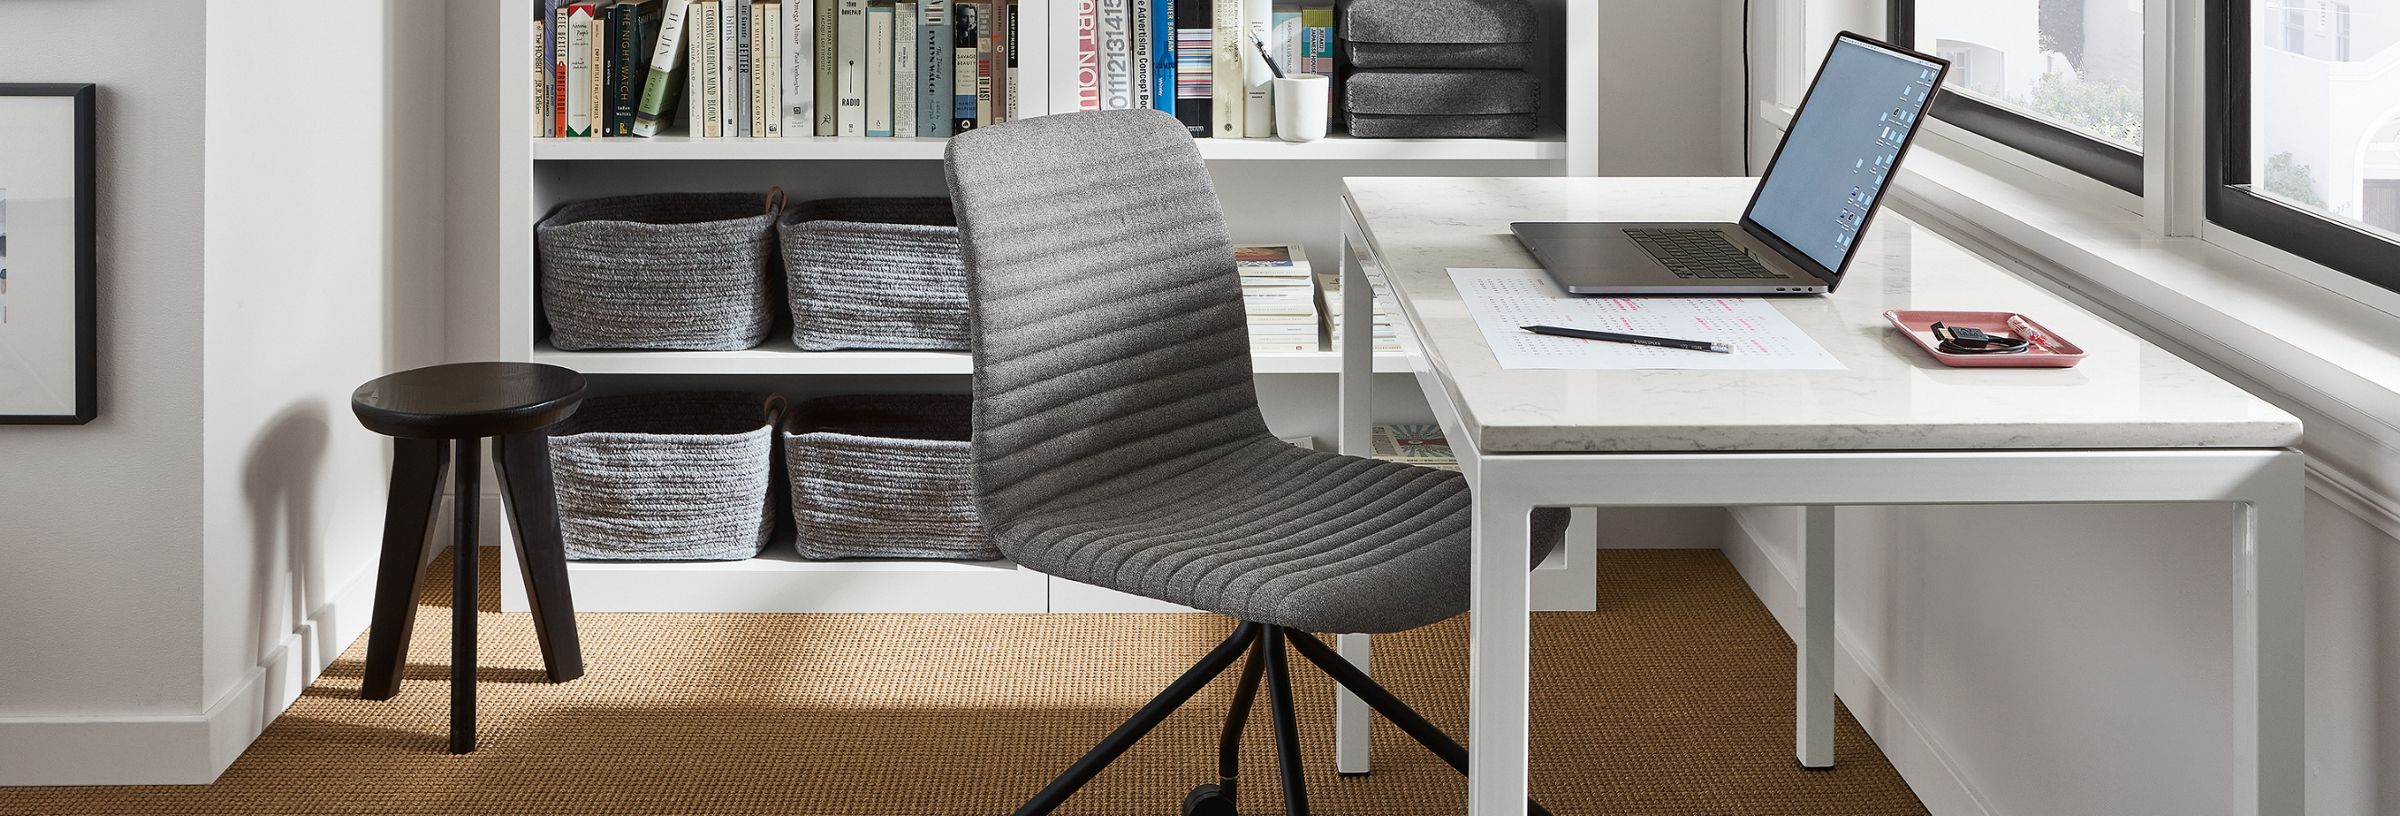 https://rnb.scene7.com/is/image/roomandboard/category_office_subcat01?size=2400,2400&scl=1